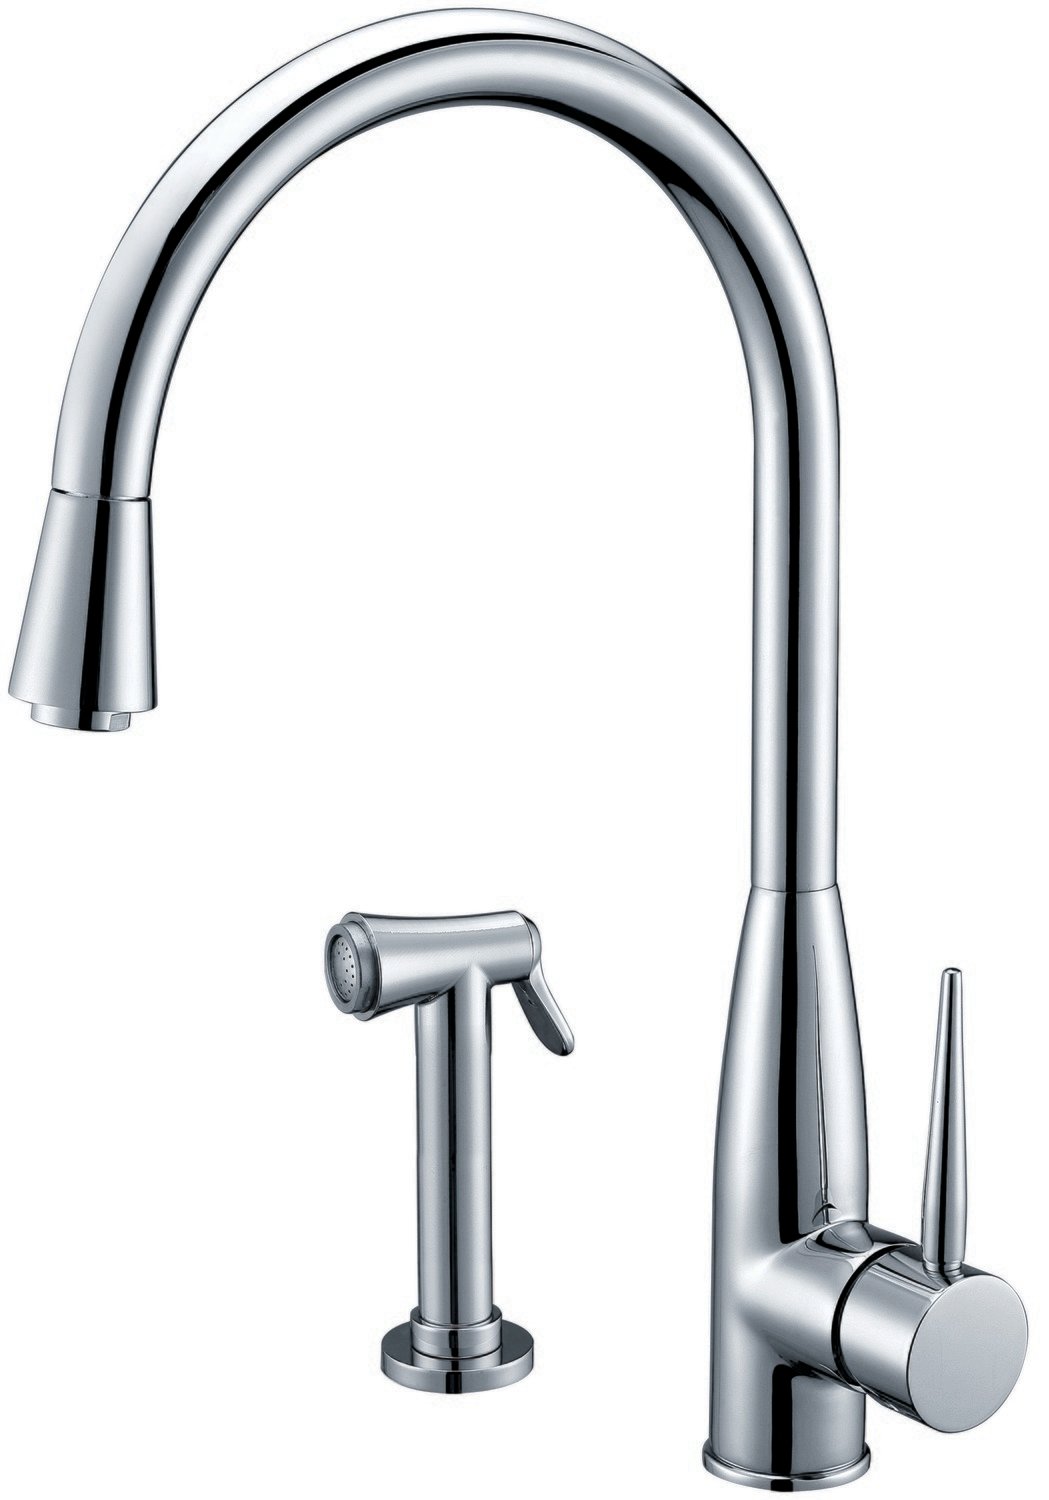 Single-lever sink mixer with side spray